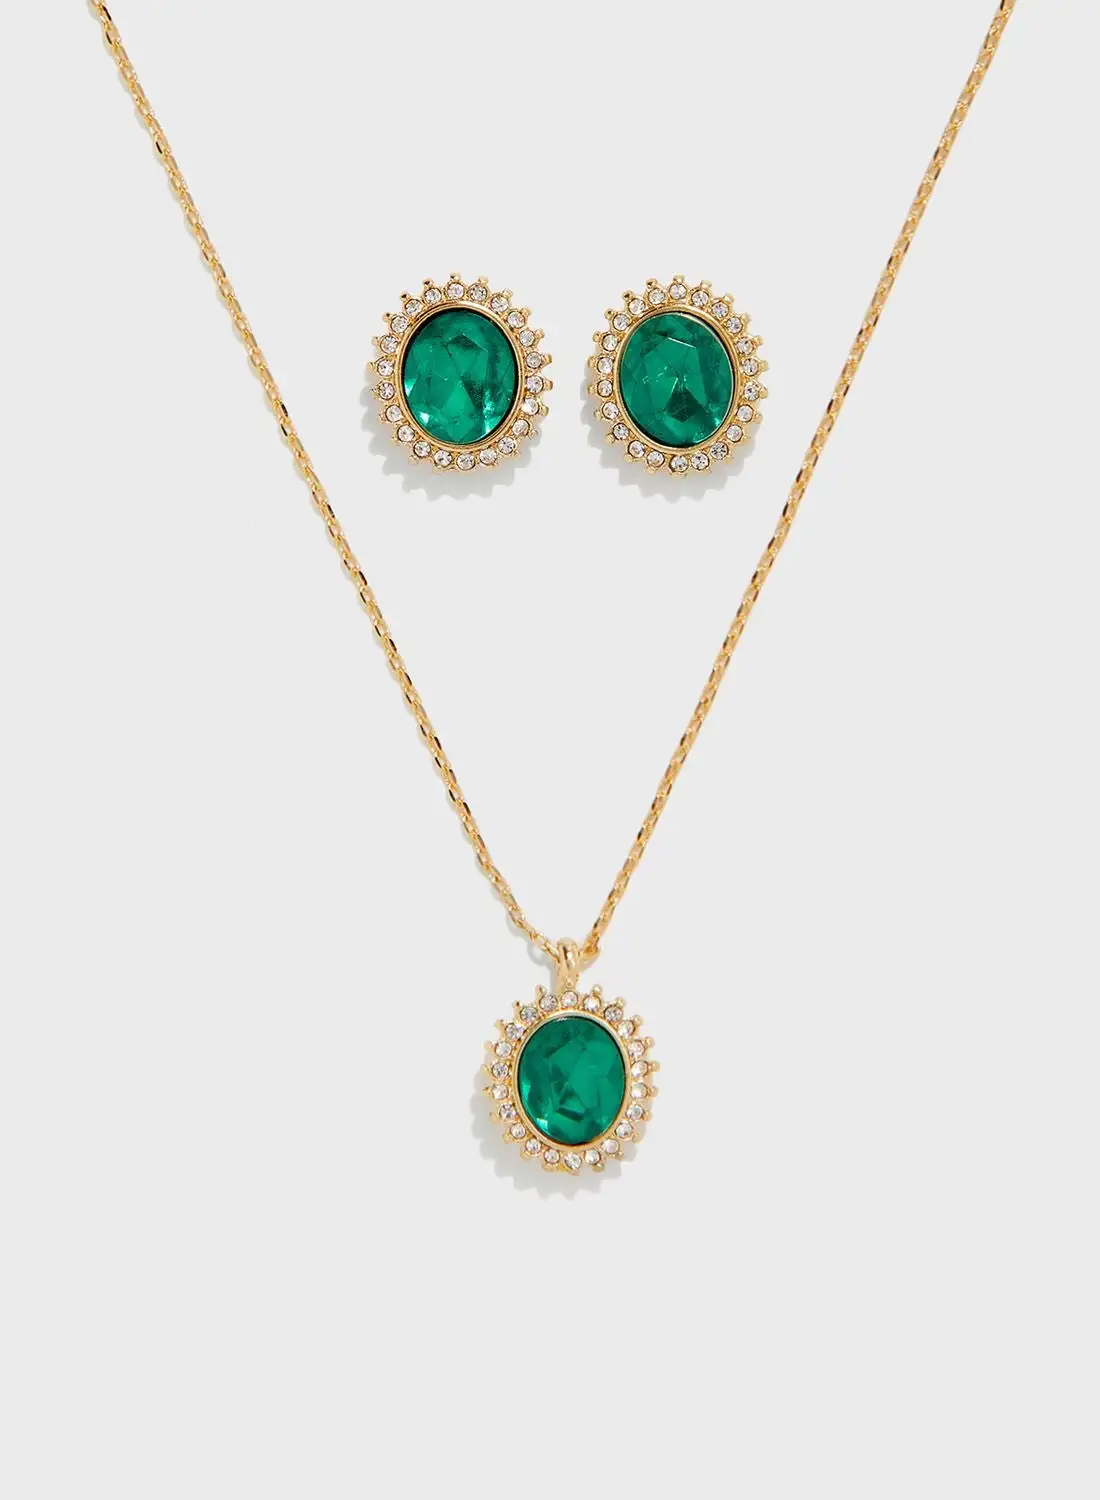 ELLA Necklace and Earrings Set